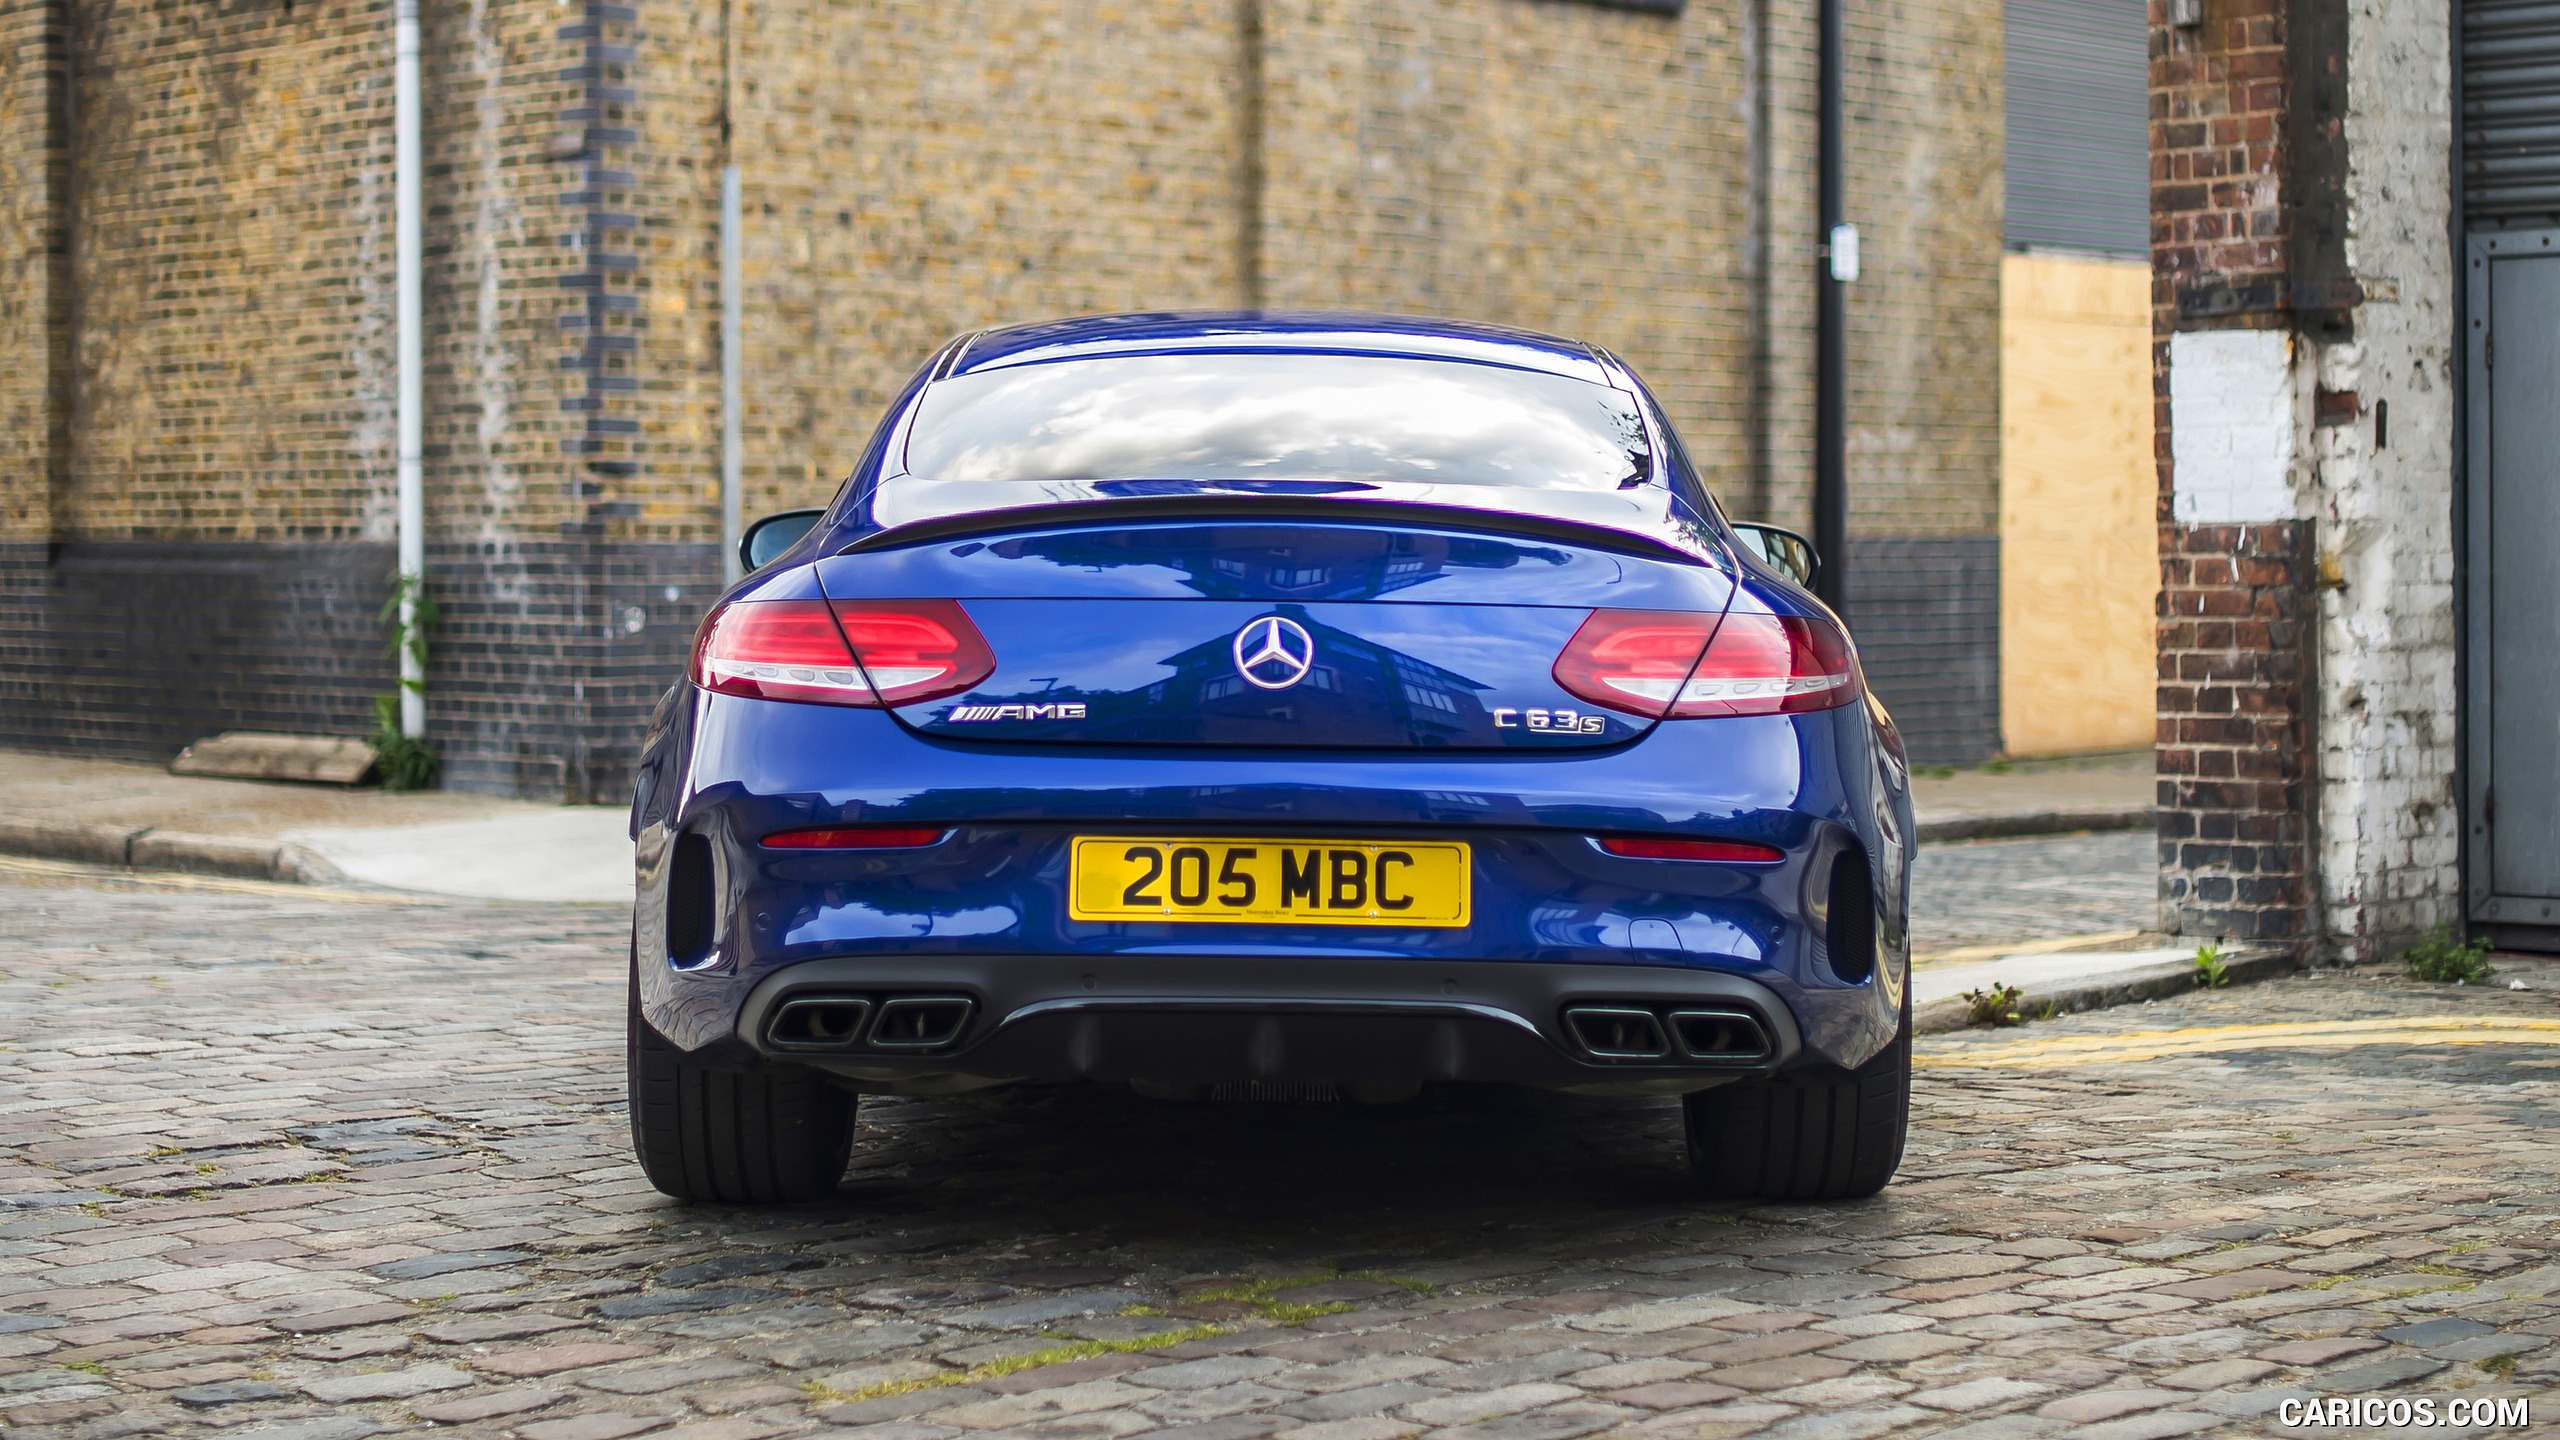 2017 Mercedes-AMG C63 S Coupe (UK-Spec) - Rear, #22 of 52